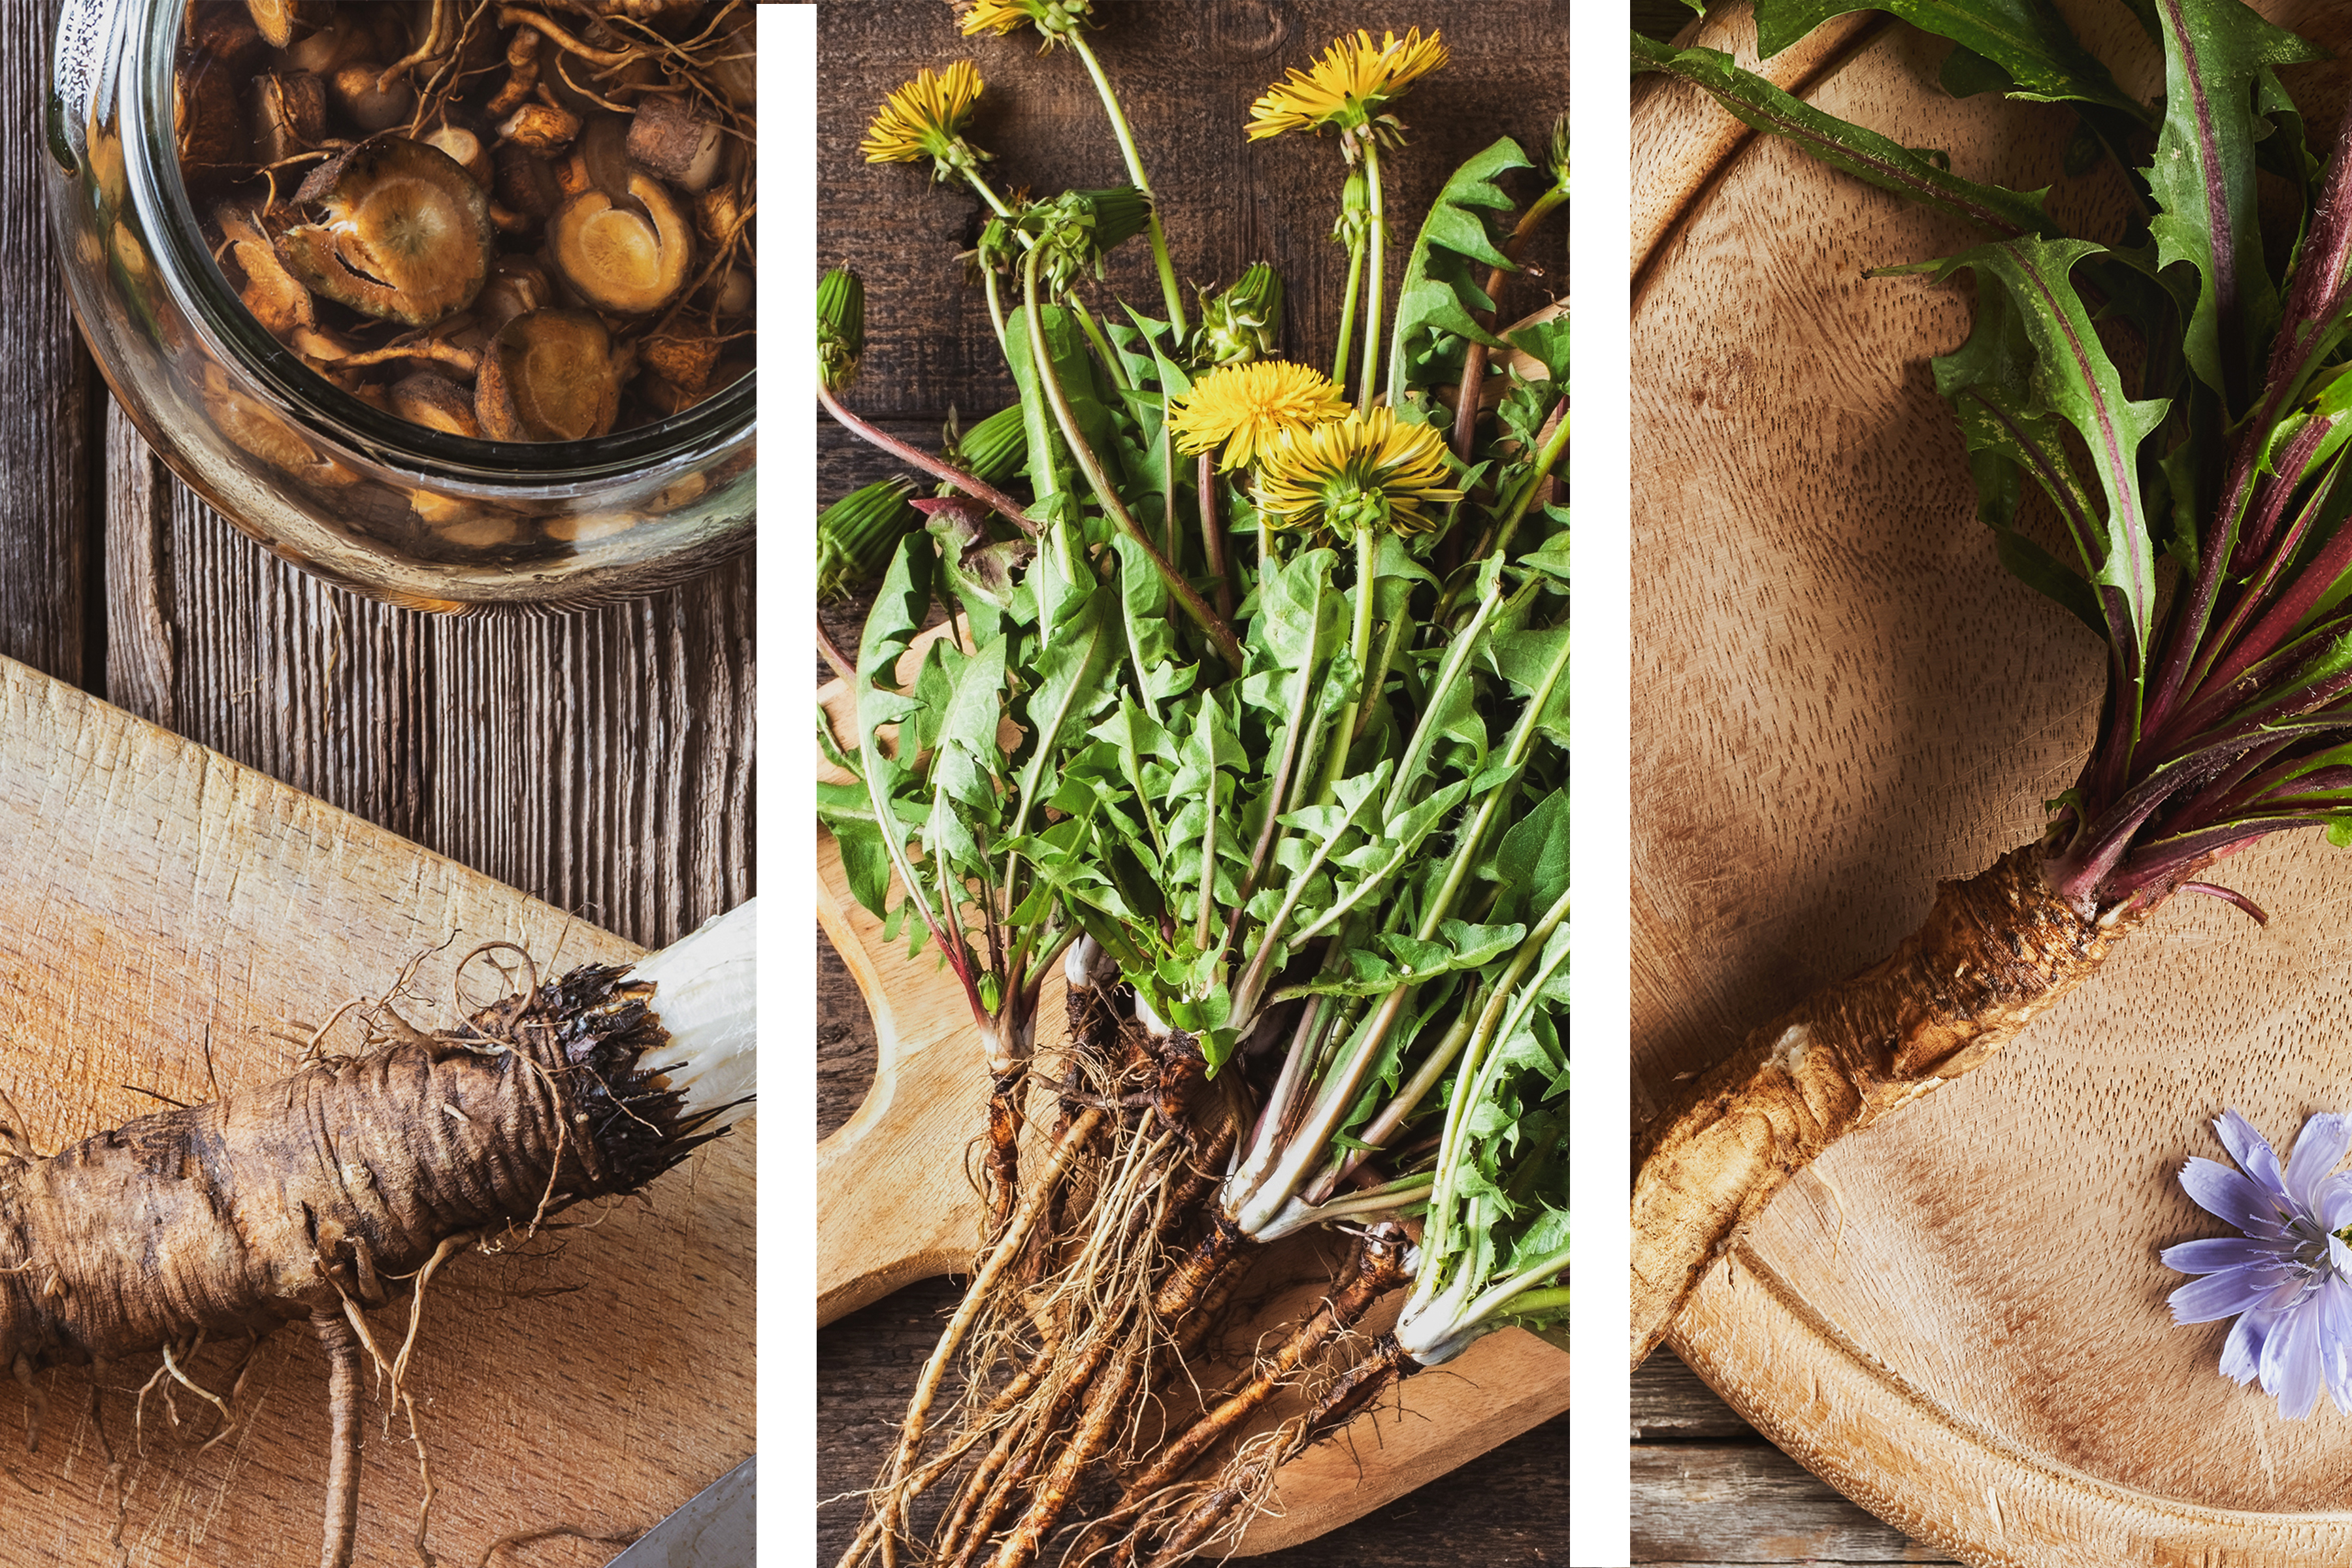 Guide To Herbal Preparations by Mountain Rose Herbs - Issuu